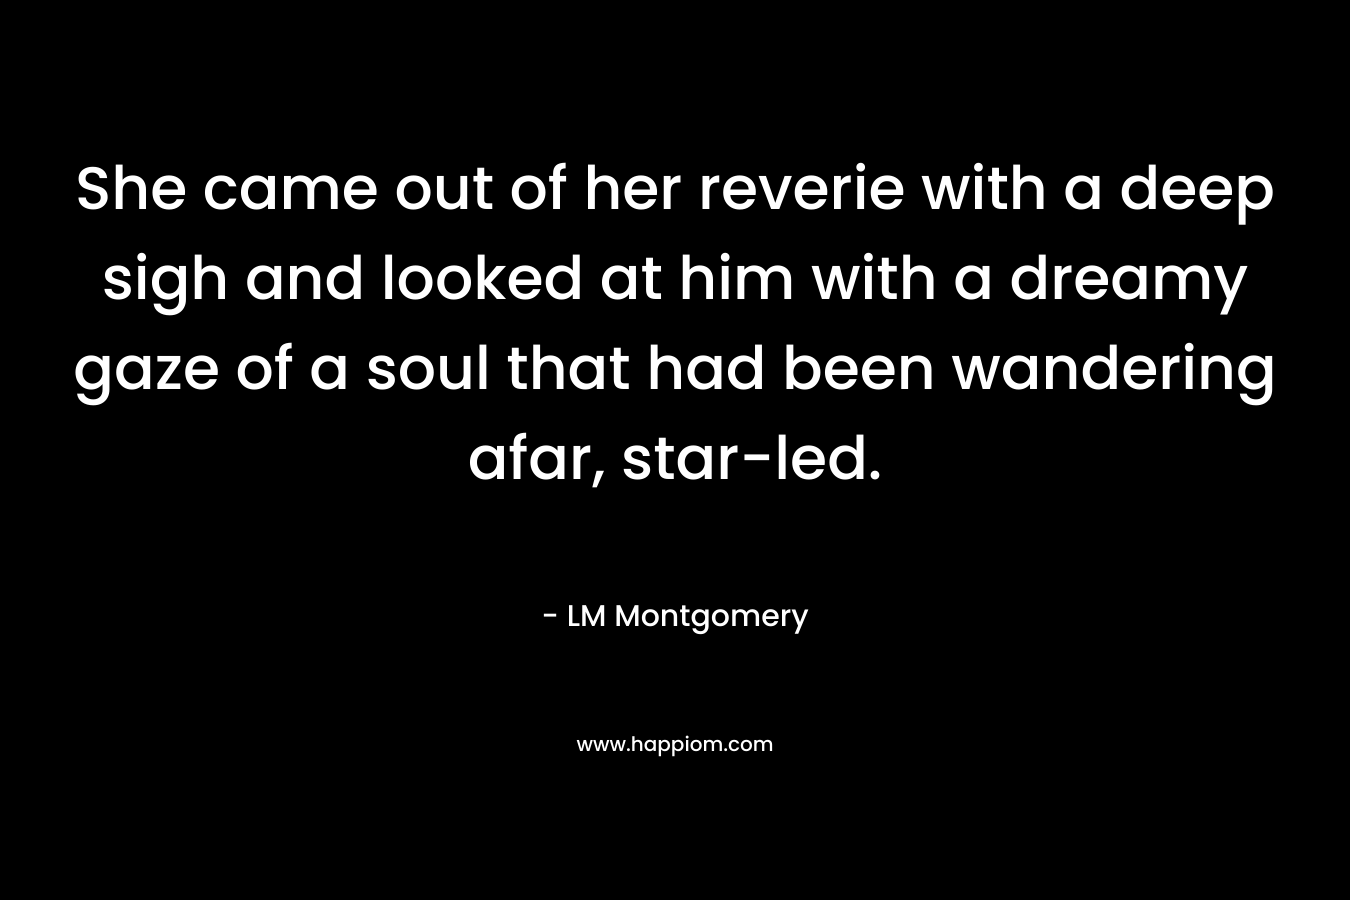 She came out of her reverie with a deep sigh and looked at him with a dreamy gaze of a soul that had been wandering afar, star-led. – LM Montgomery